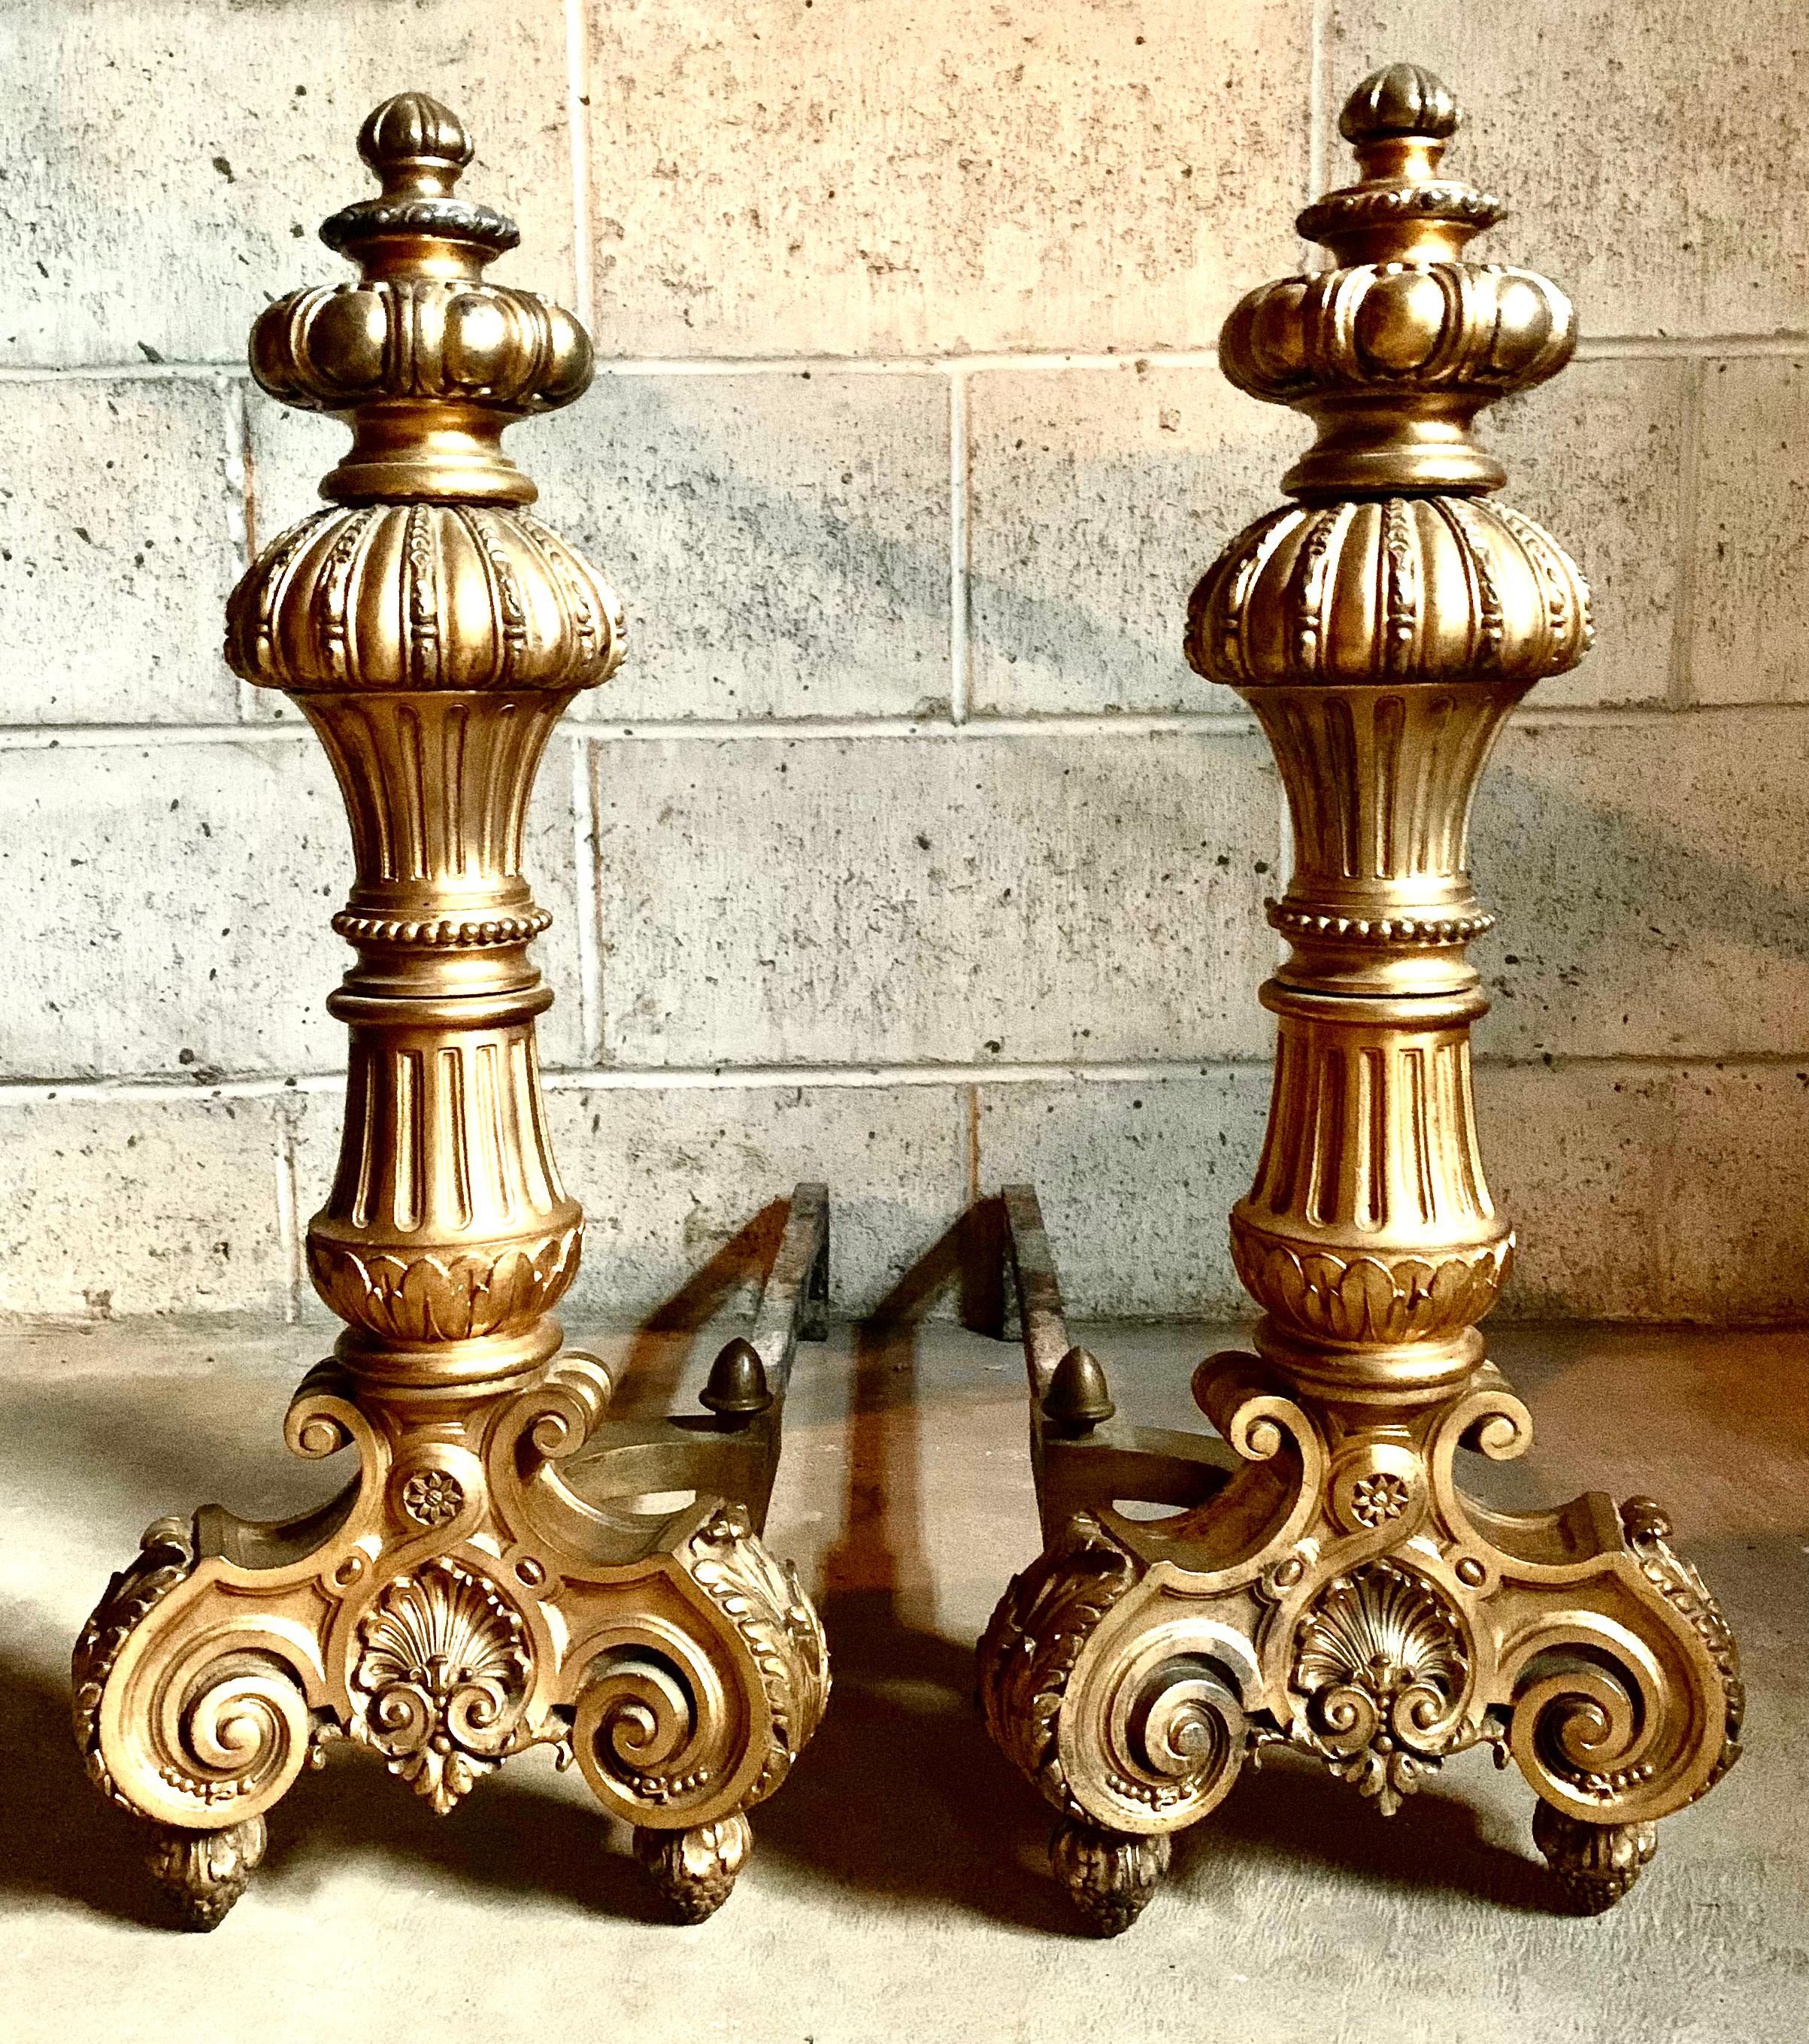 Large and impressive pair of 19th century Louis XIV style gilt bronze andirons.
A festive fire is one of the great pleasures of winter and the warm glow of firelight on the fine French gilt bronze of these magnificent andirons will transform any